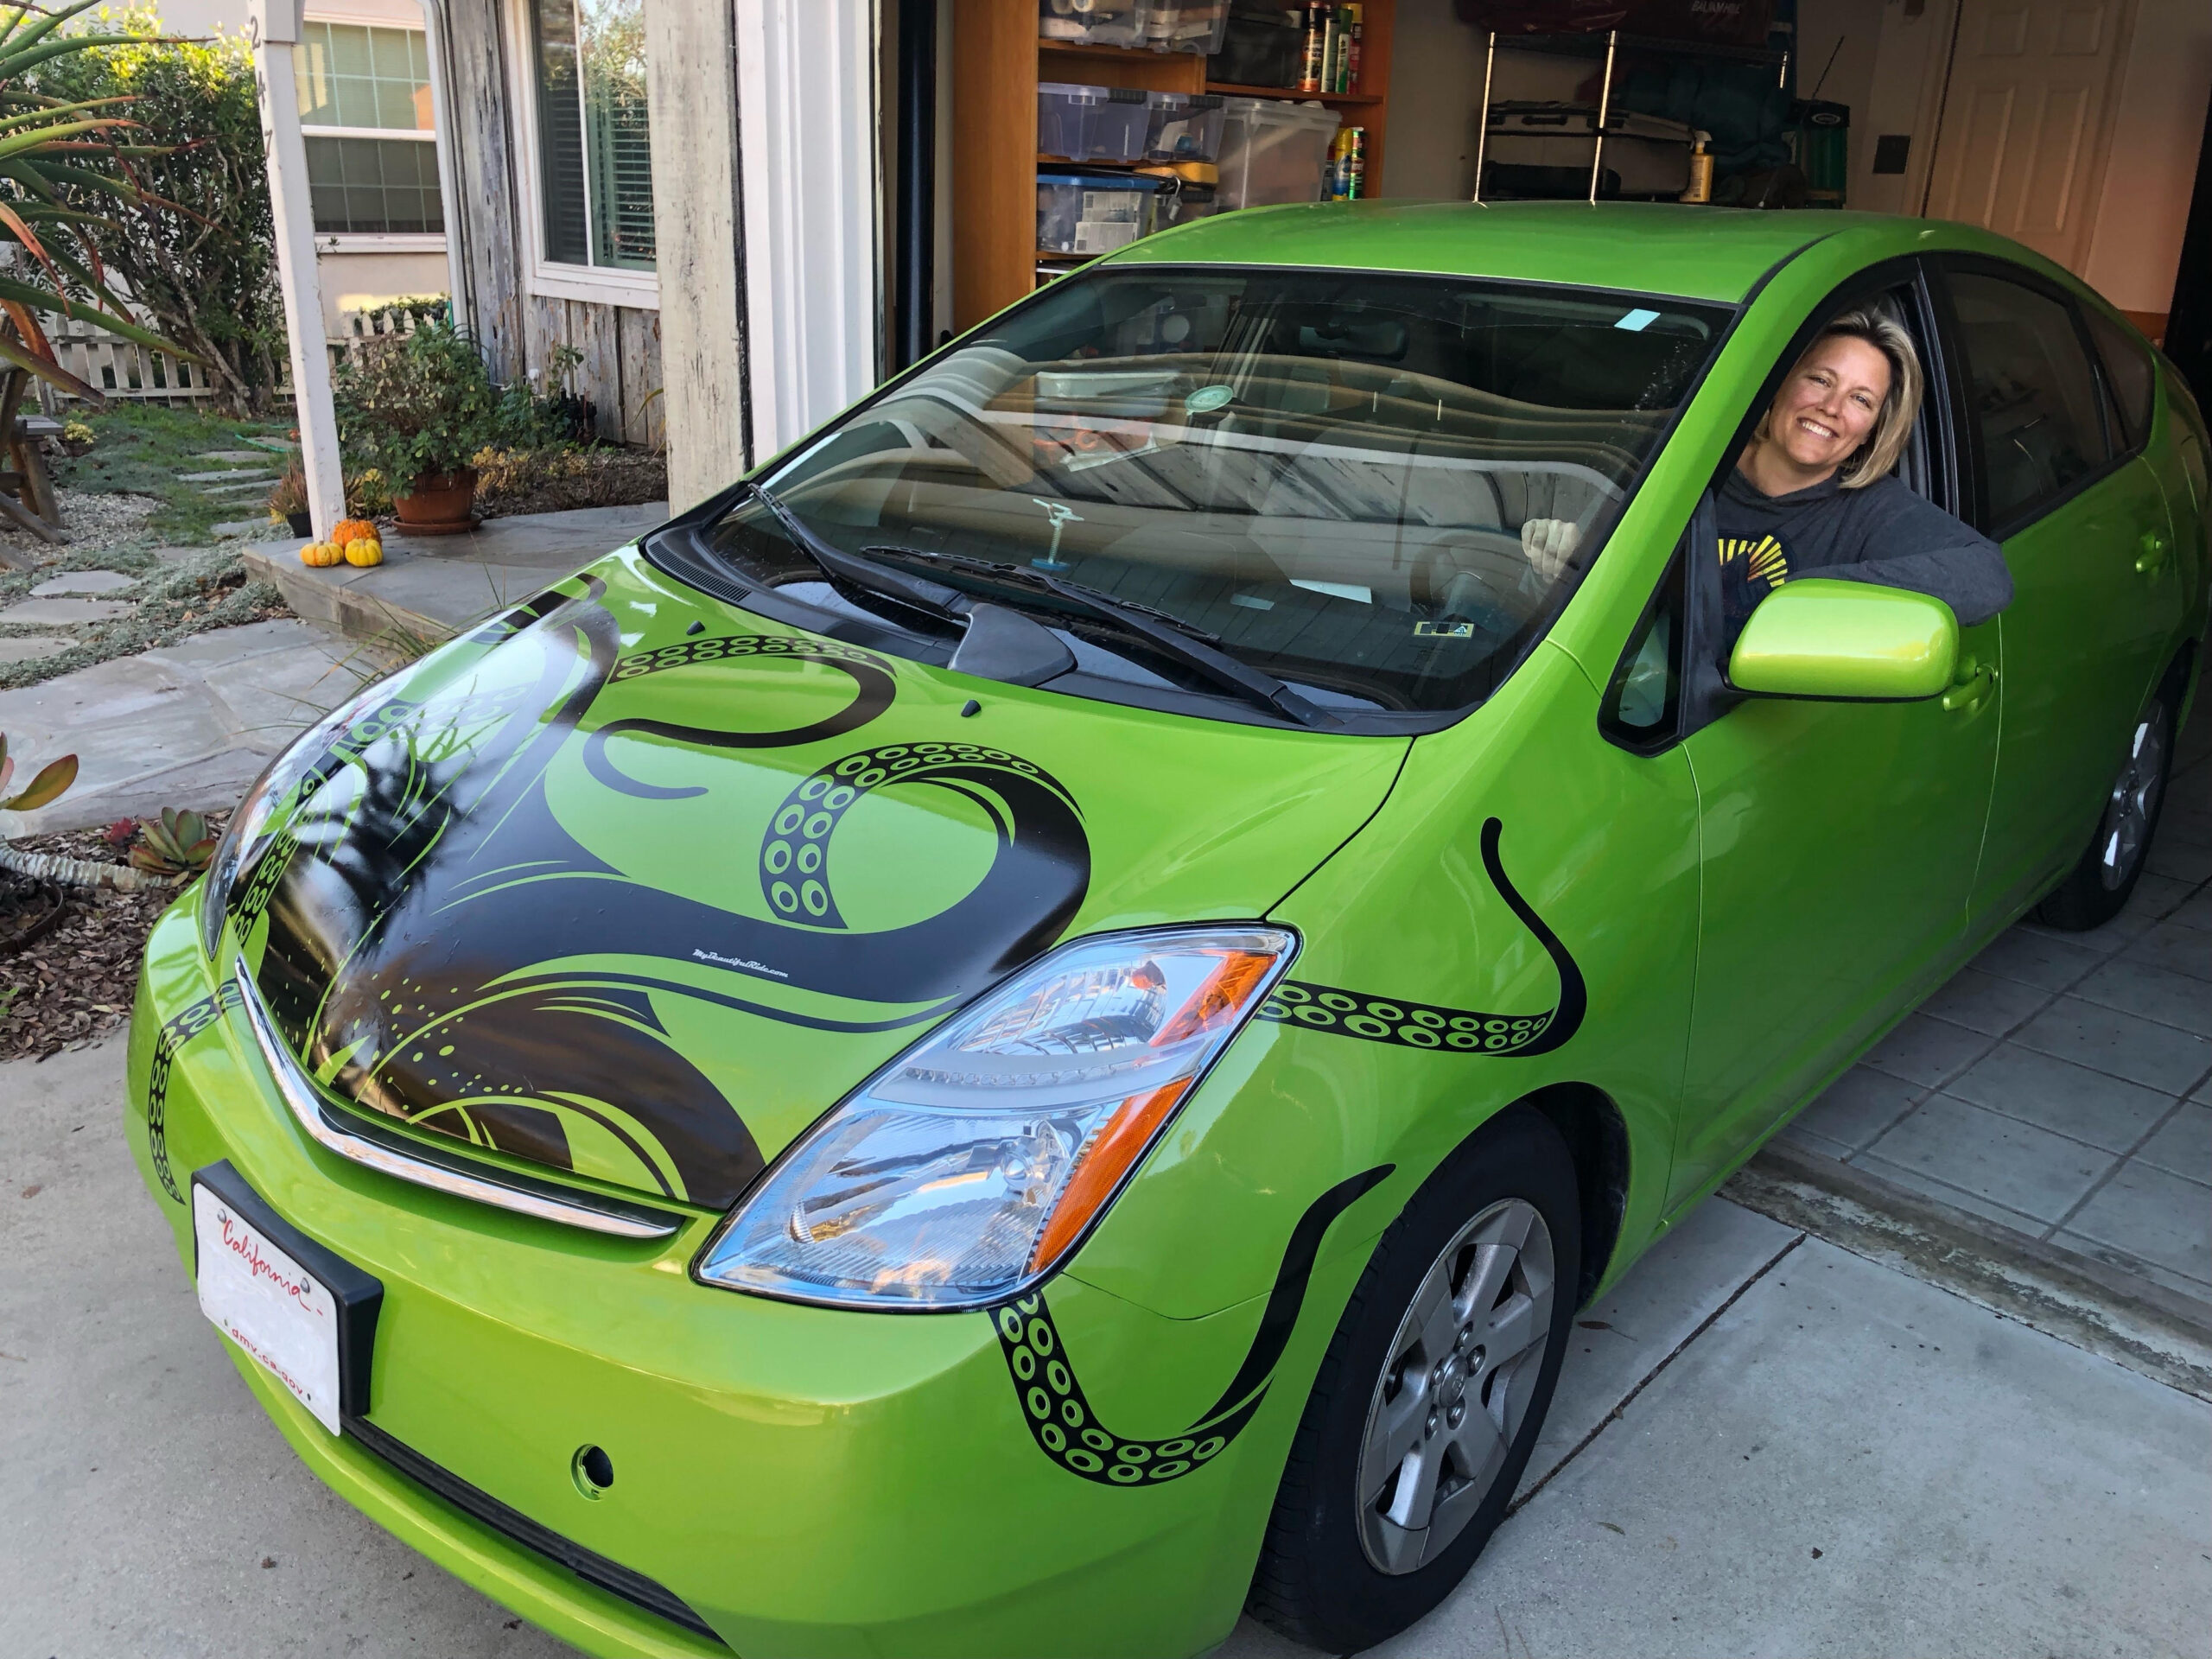 Blonde woman sitting in the driver's seat of a bright green prius with a giant kraken or octopus climing out of the hood engine compartment with tentacles down the sides of the car